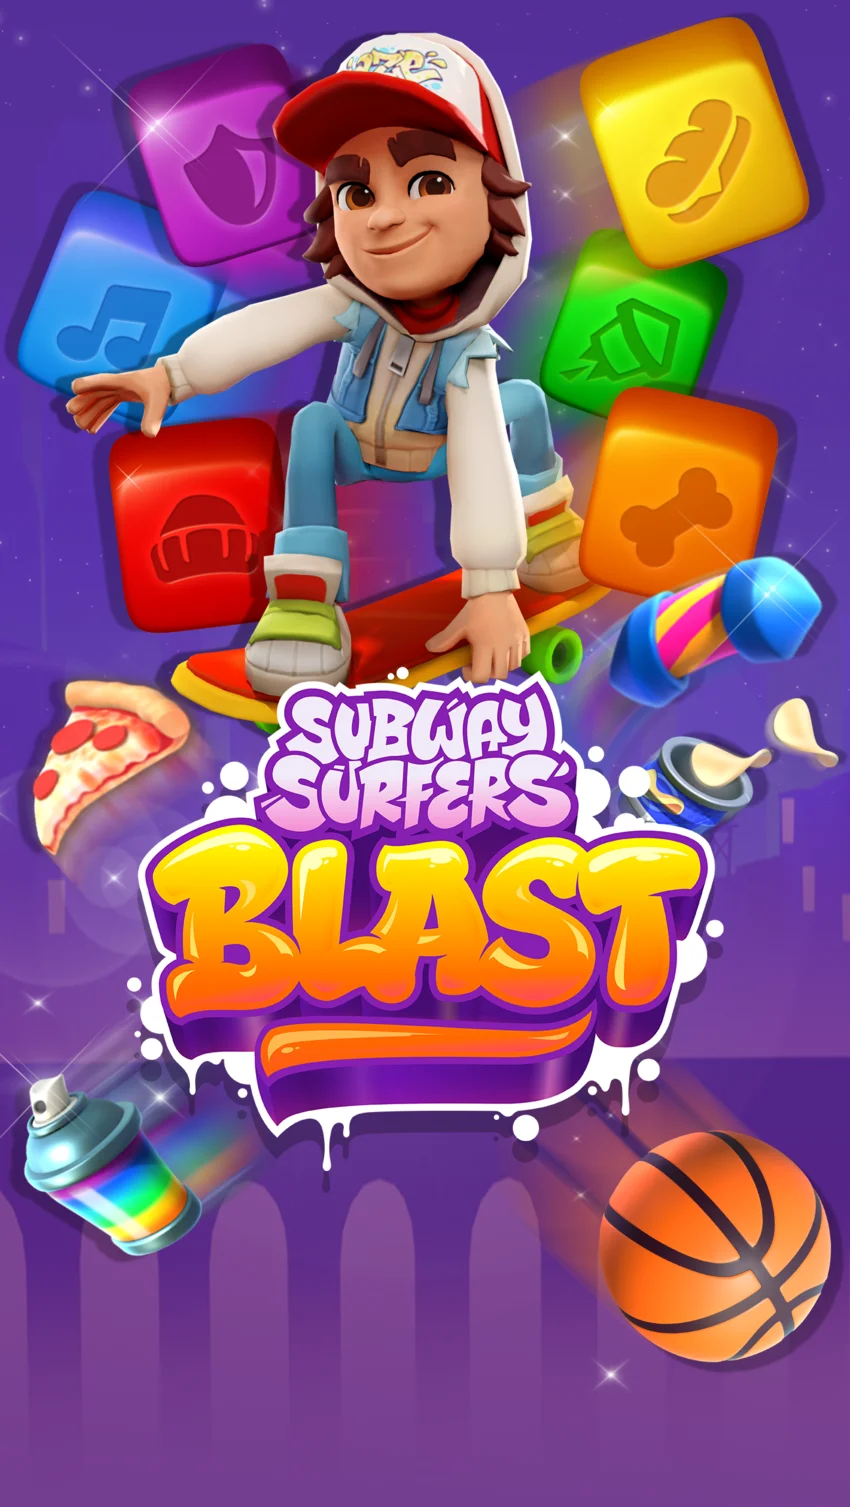 OUT NOW: Subway Surfers Blast - The Scottish Games Network